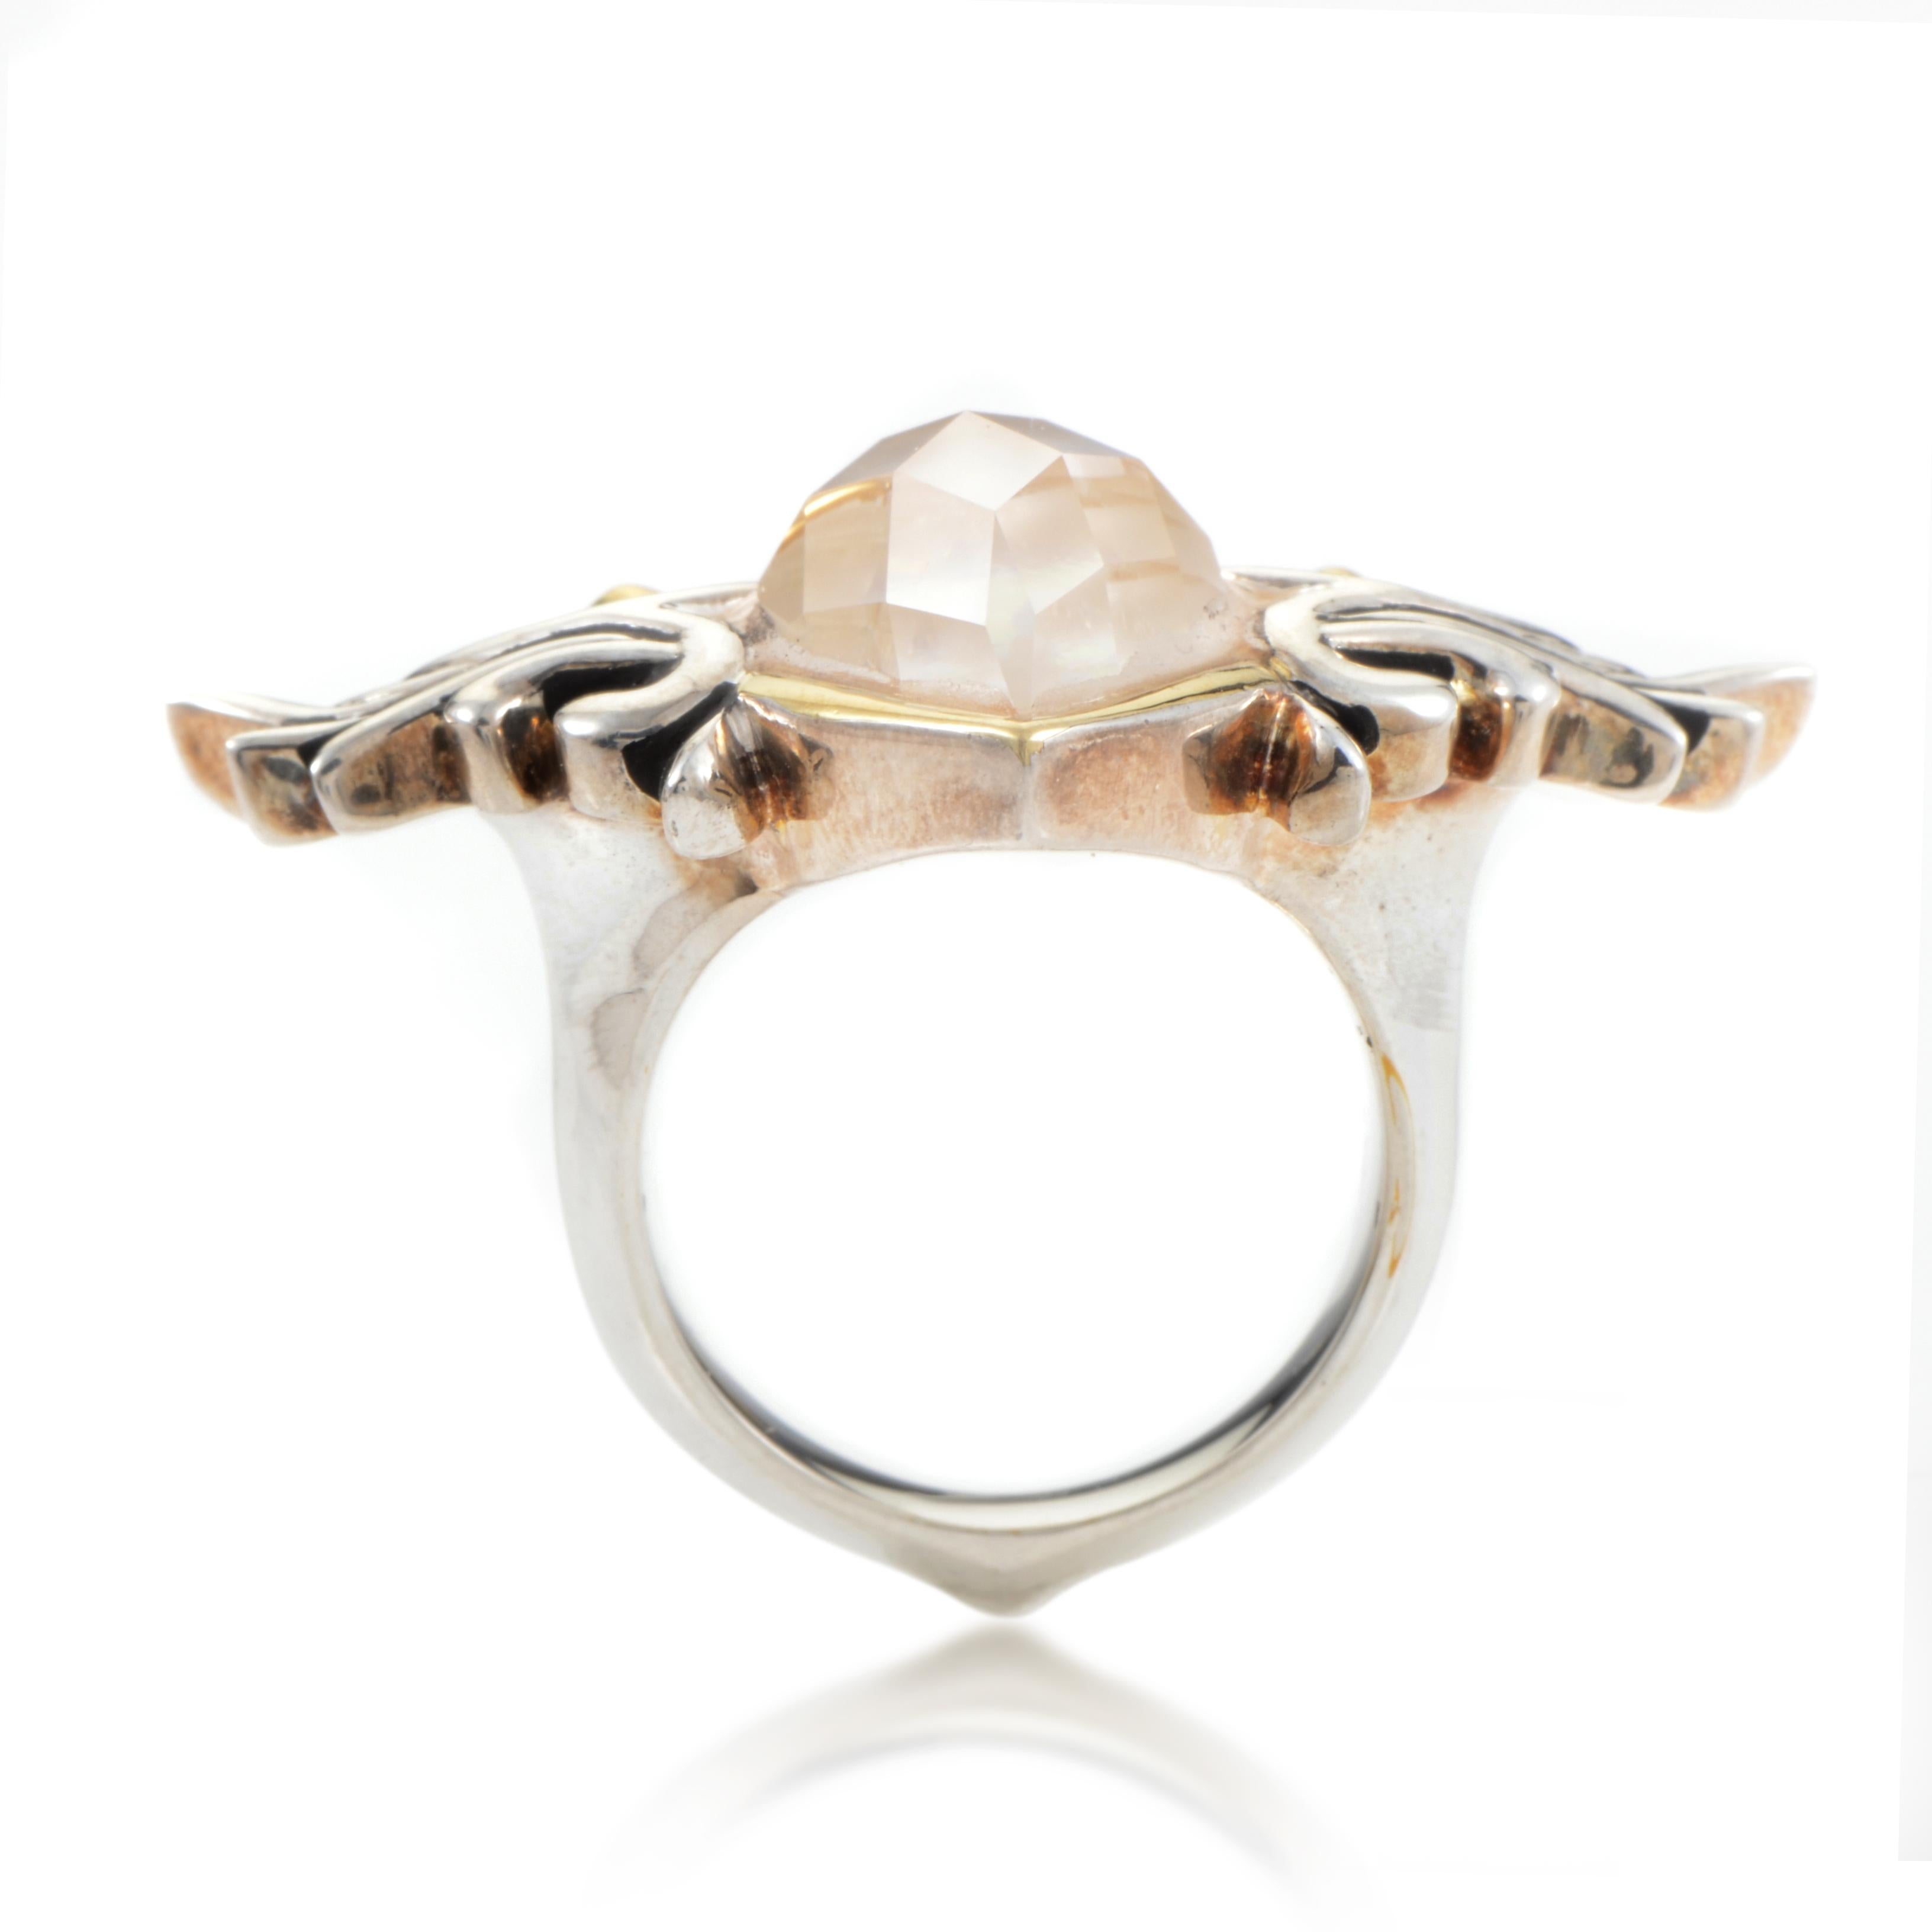 Upon a brilliantly designed and expertly crafted body which is made of polished sterling silver and boasts an appealing ornate spirit, this stunningly incredible ring from Stephen Webster's brilliant 'Superstud' collection is a must have! The